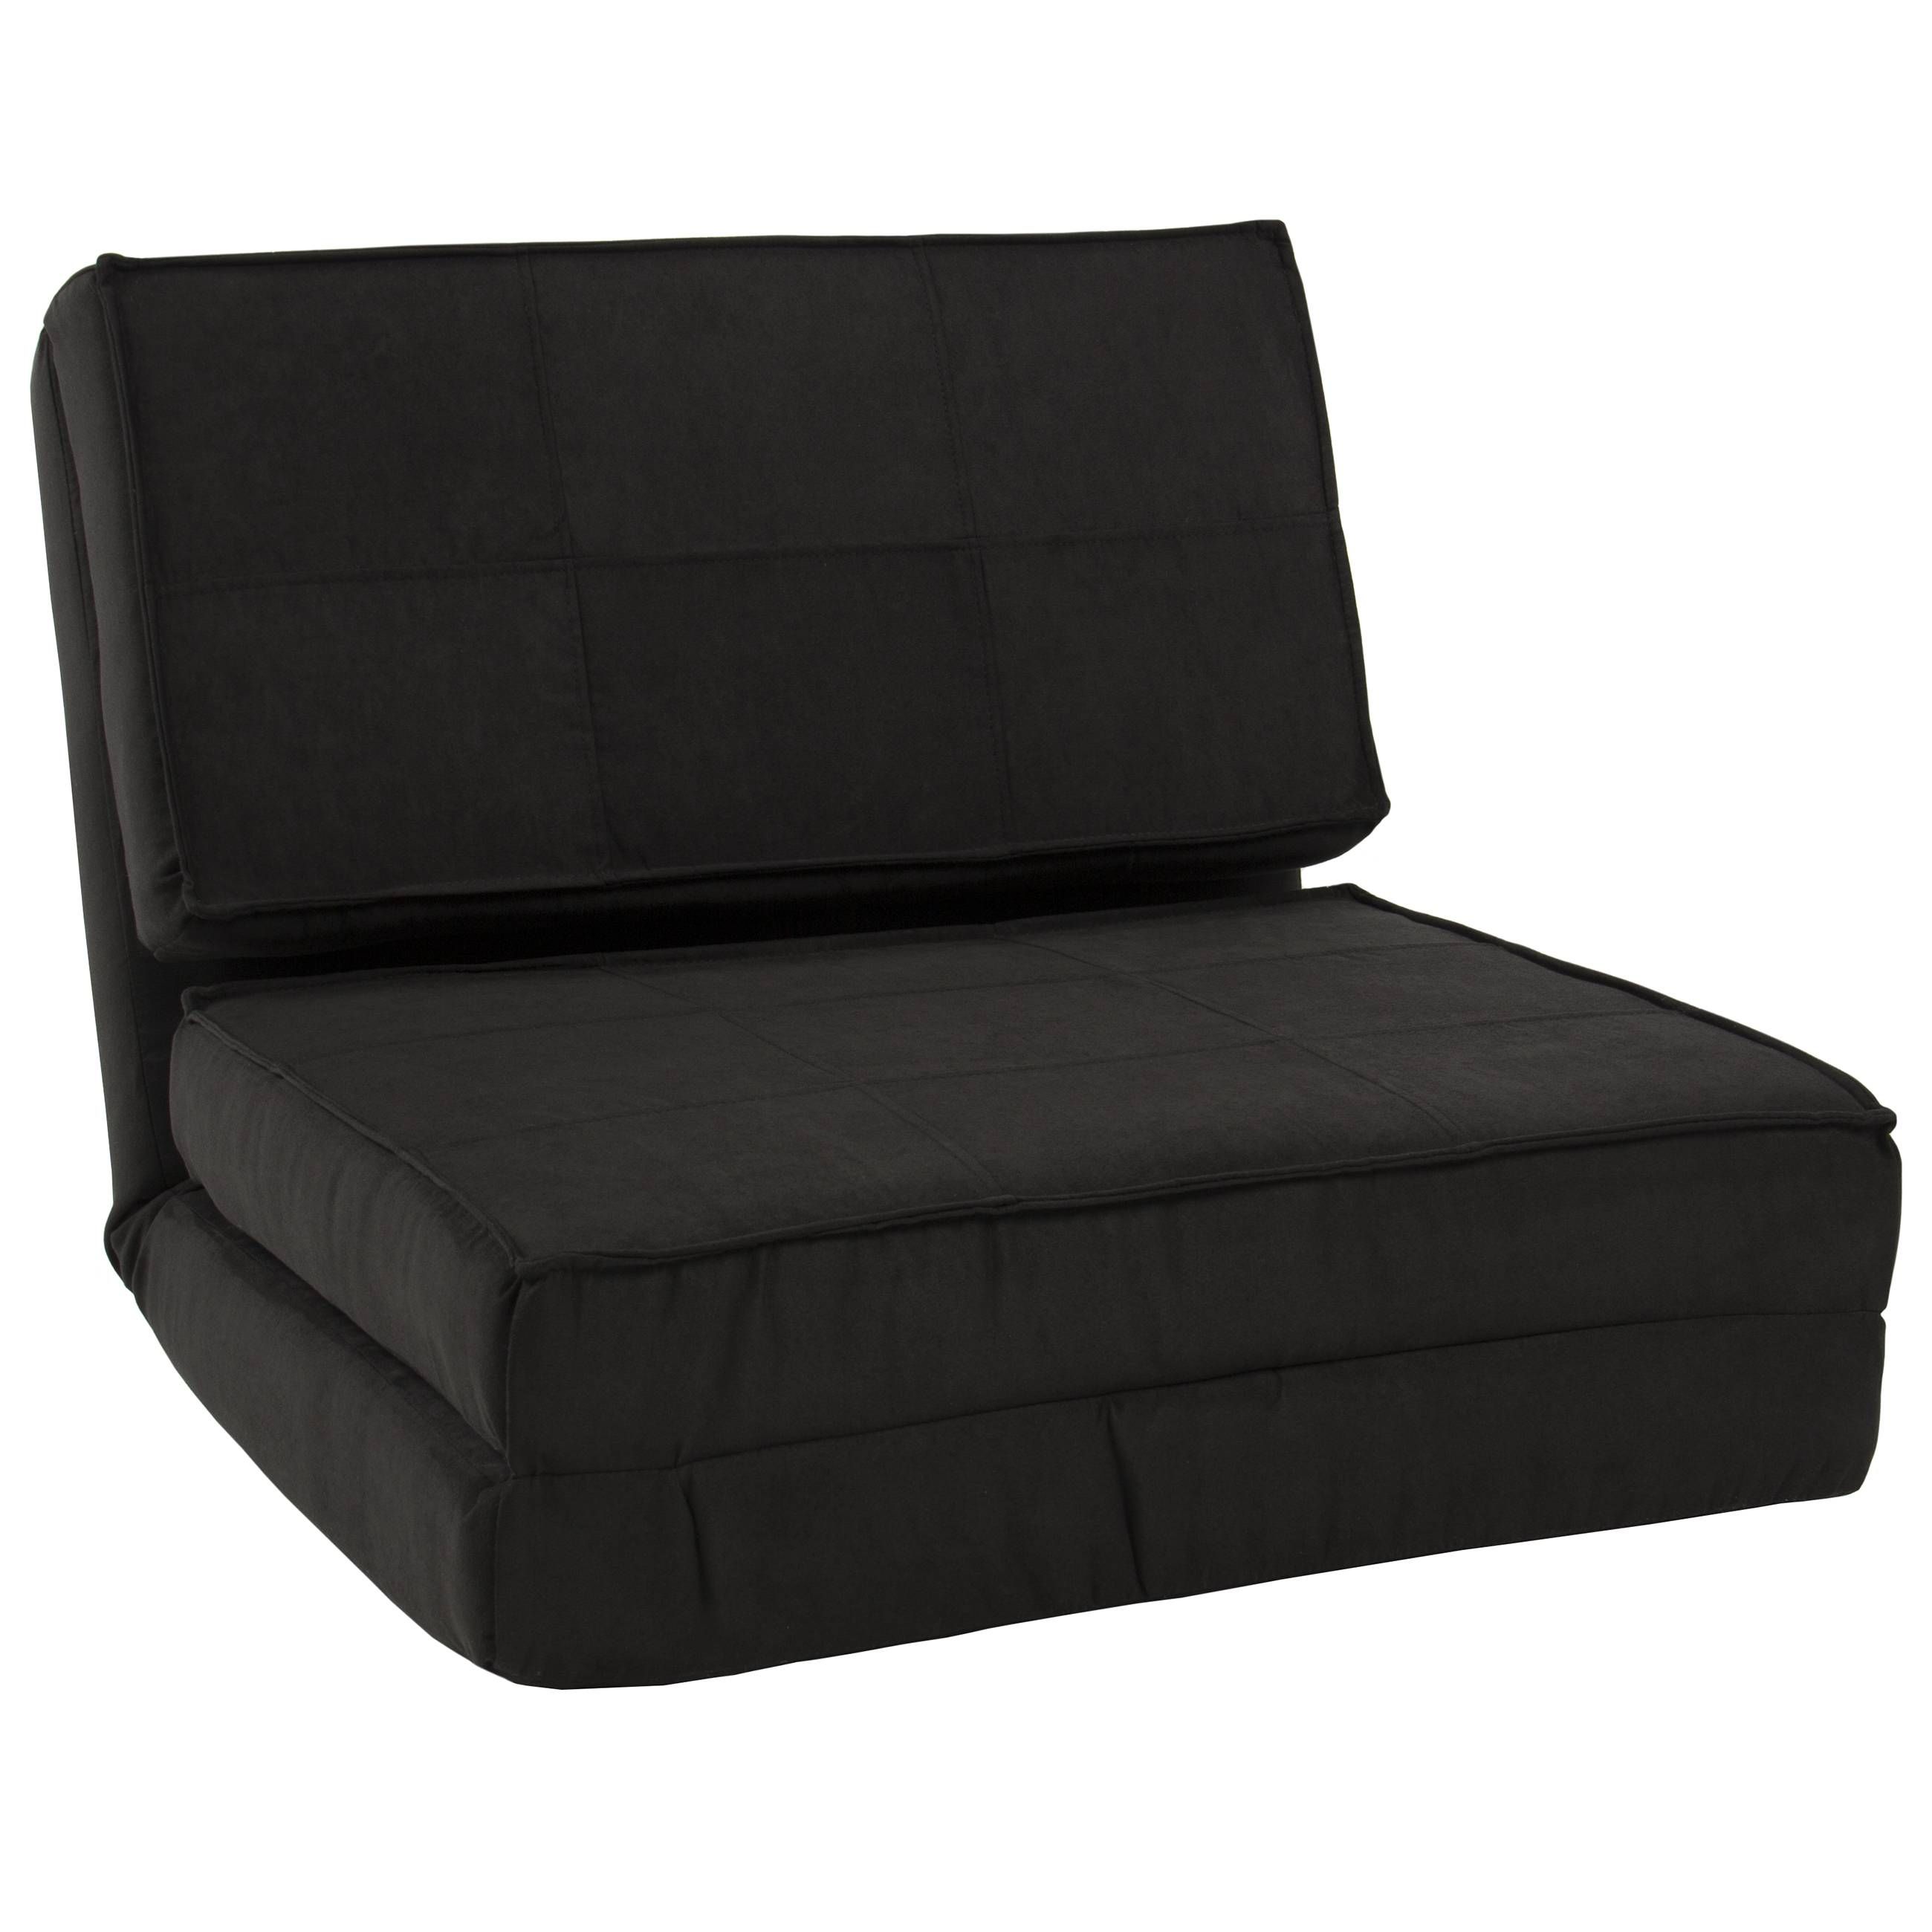 Fold Down Chair Flip Out Lounger Convertible Sleeper Bed Couch Regarding Sofa Lounger Beds (View 9 of 30)